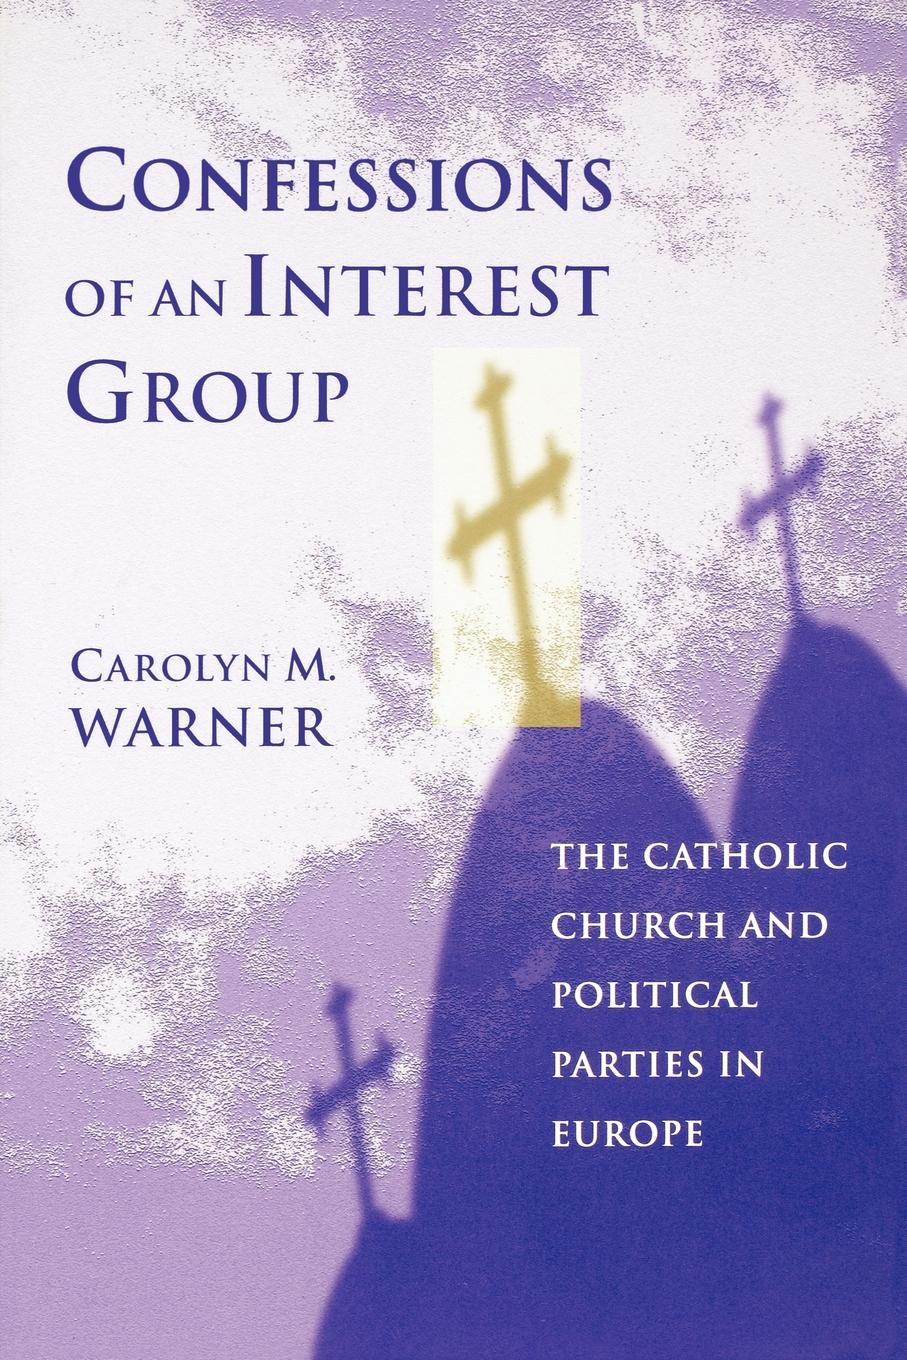 Confessions of an Interest Group. The Catholic Church and Political Parties in Europe